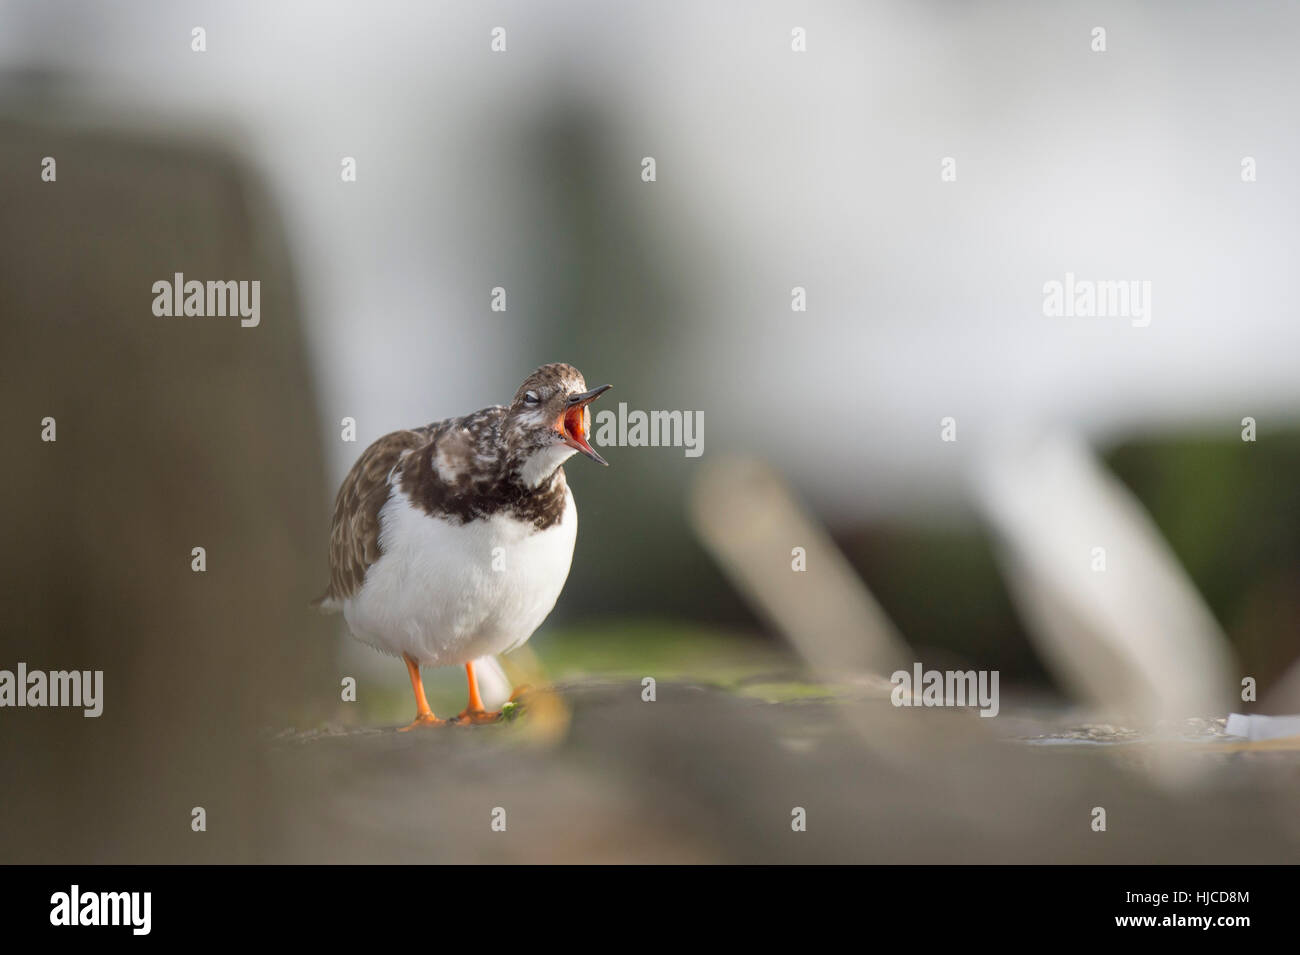 A Ruddy Turnstone calls loudly as it stands on a jetty. Stock Photo